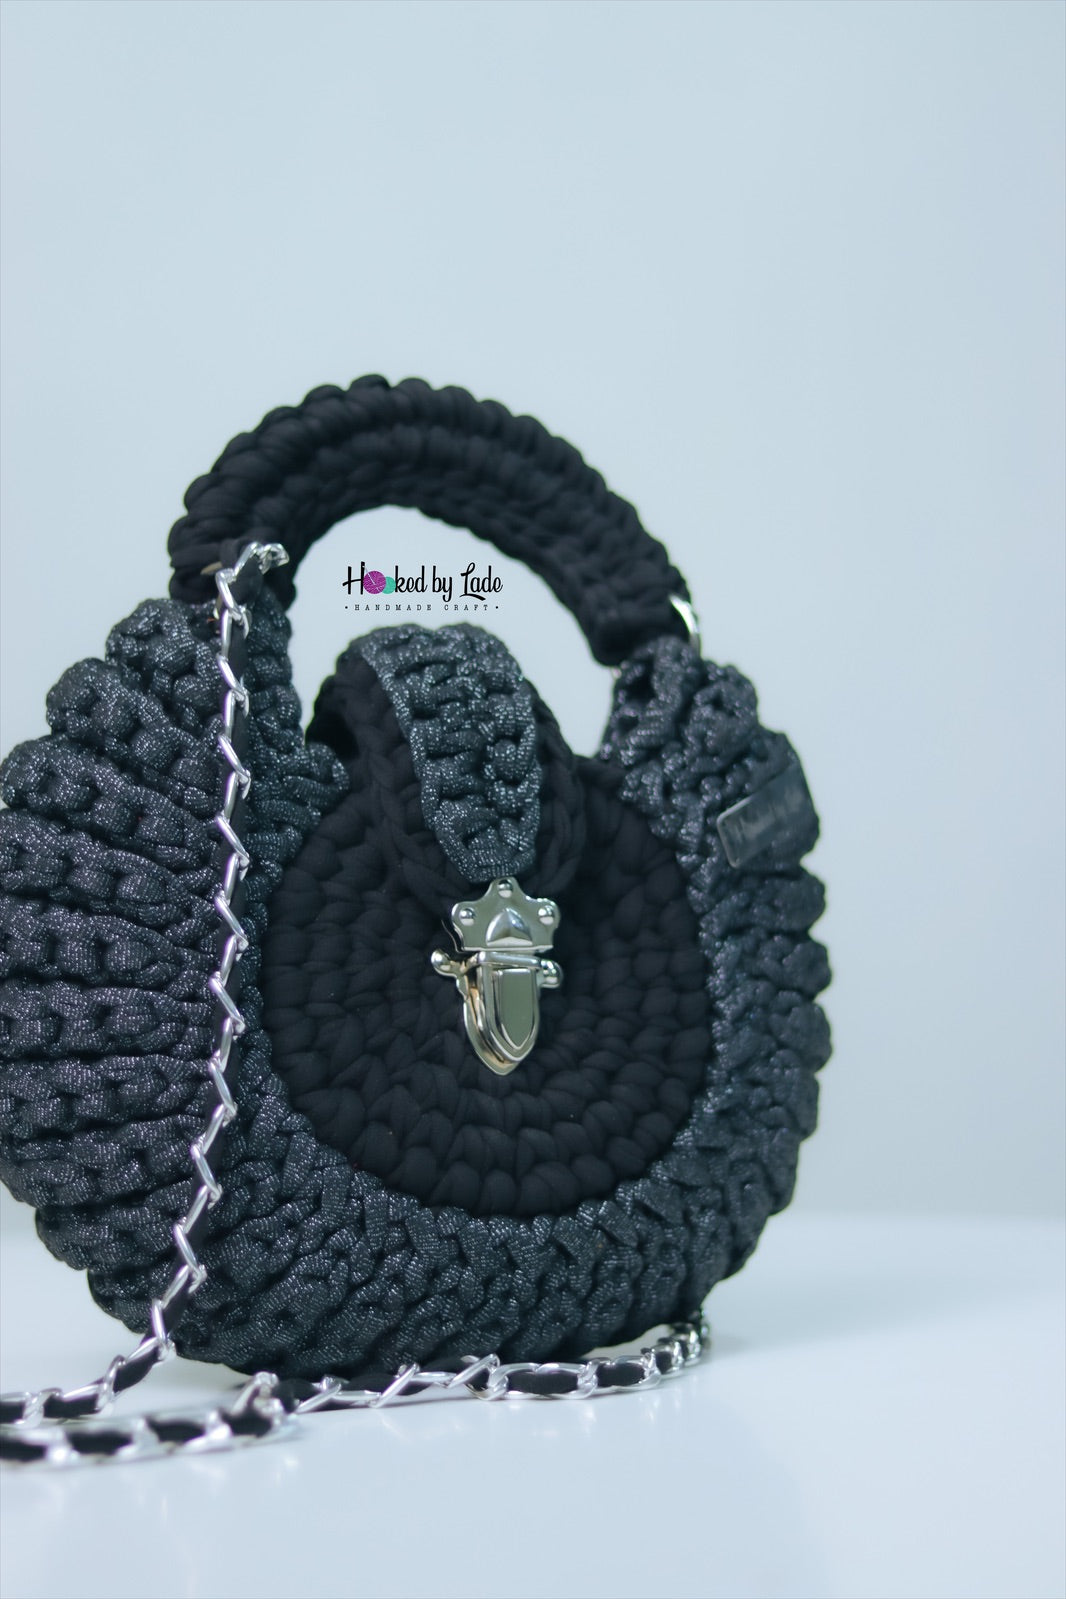 Round Crochet Bag | Stunning Crochet Bag | Hooked by Lade